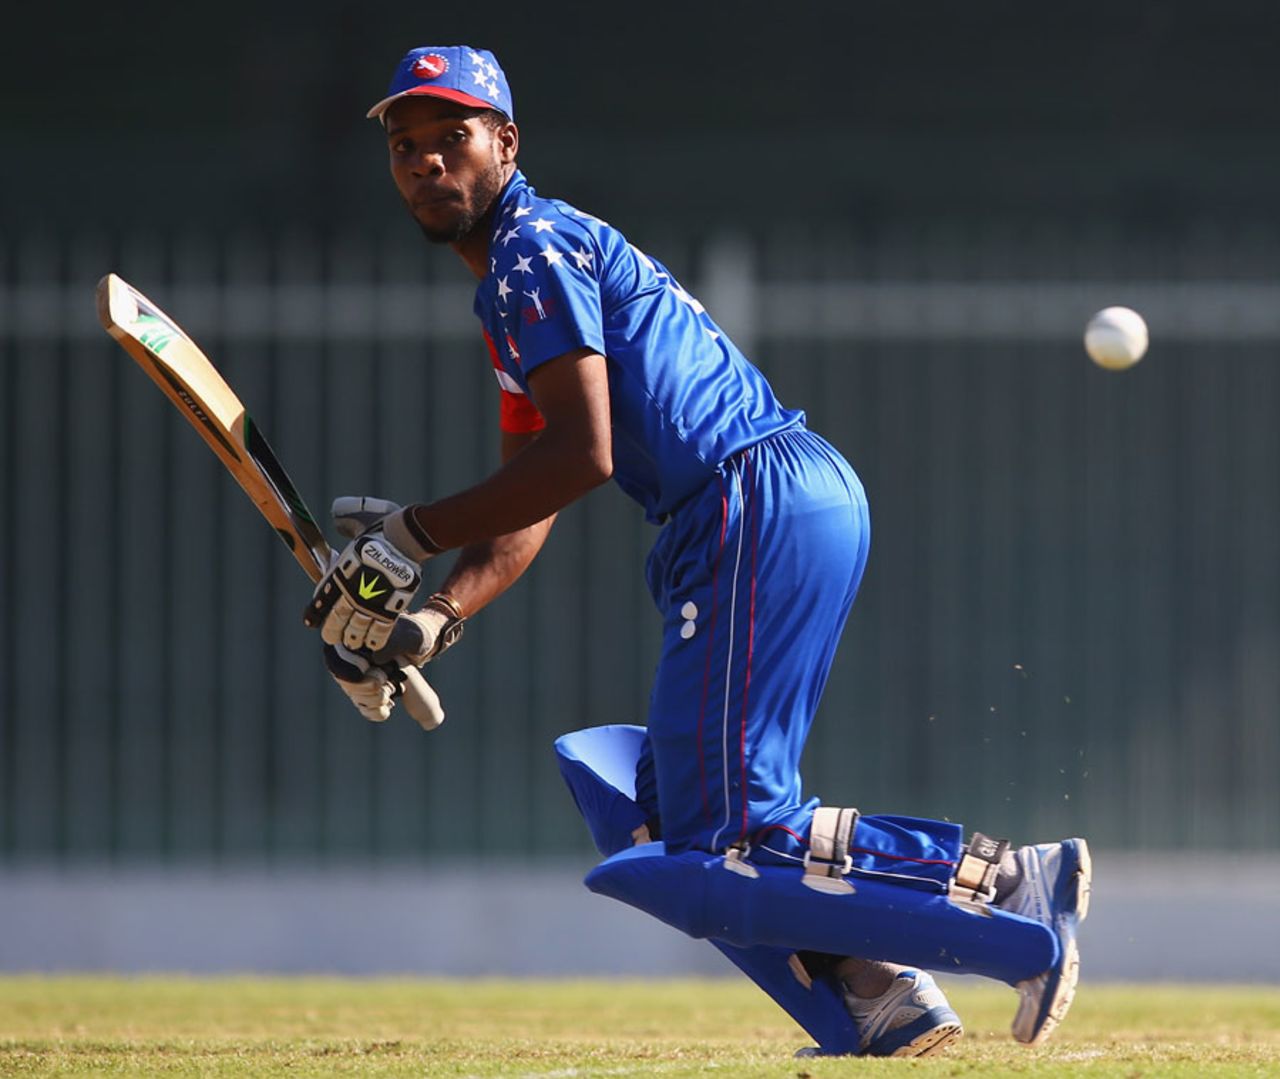 Akeem Dodson plays an off-side shot during his knock of 41, United States of America v Denmark, ICC World Twenty20 Qualifier, 15th place play-off, Sharjah, November 26, 2013